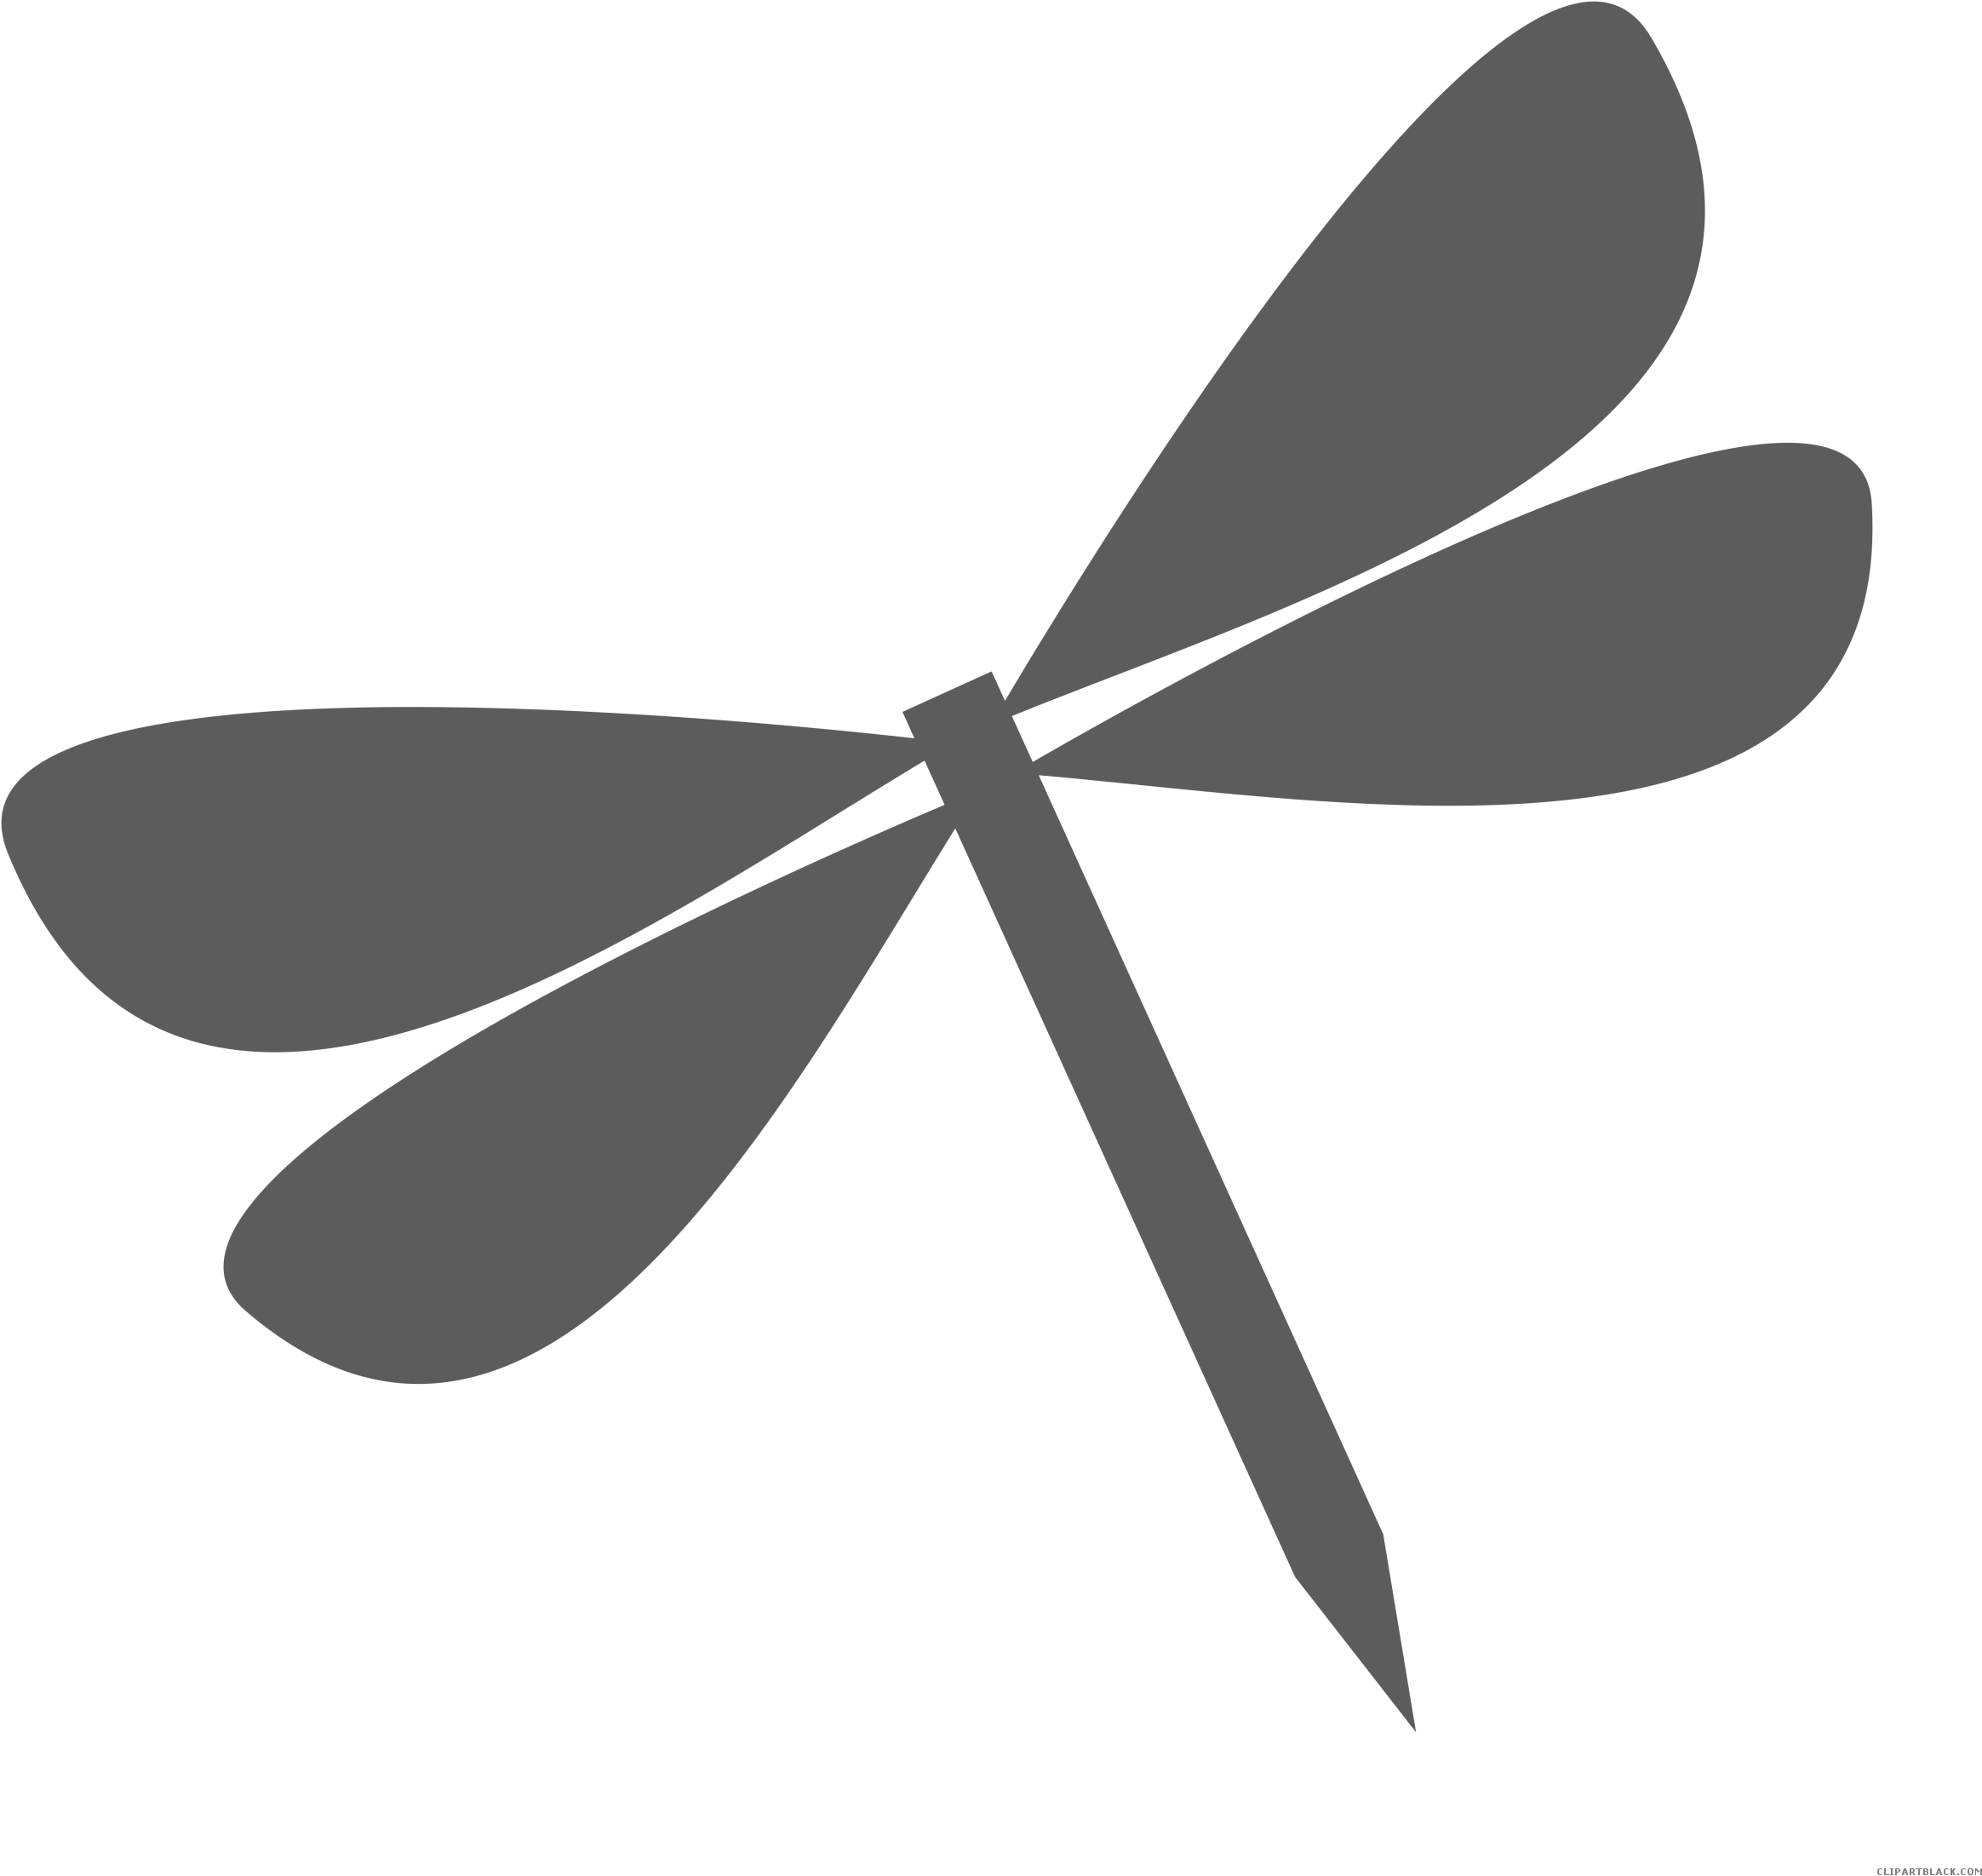 Dragonfly Animal Free Black White Clipart Images Clipartblack - Dragonfly Vector Png (2400x2400)